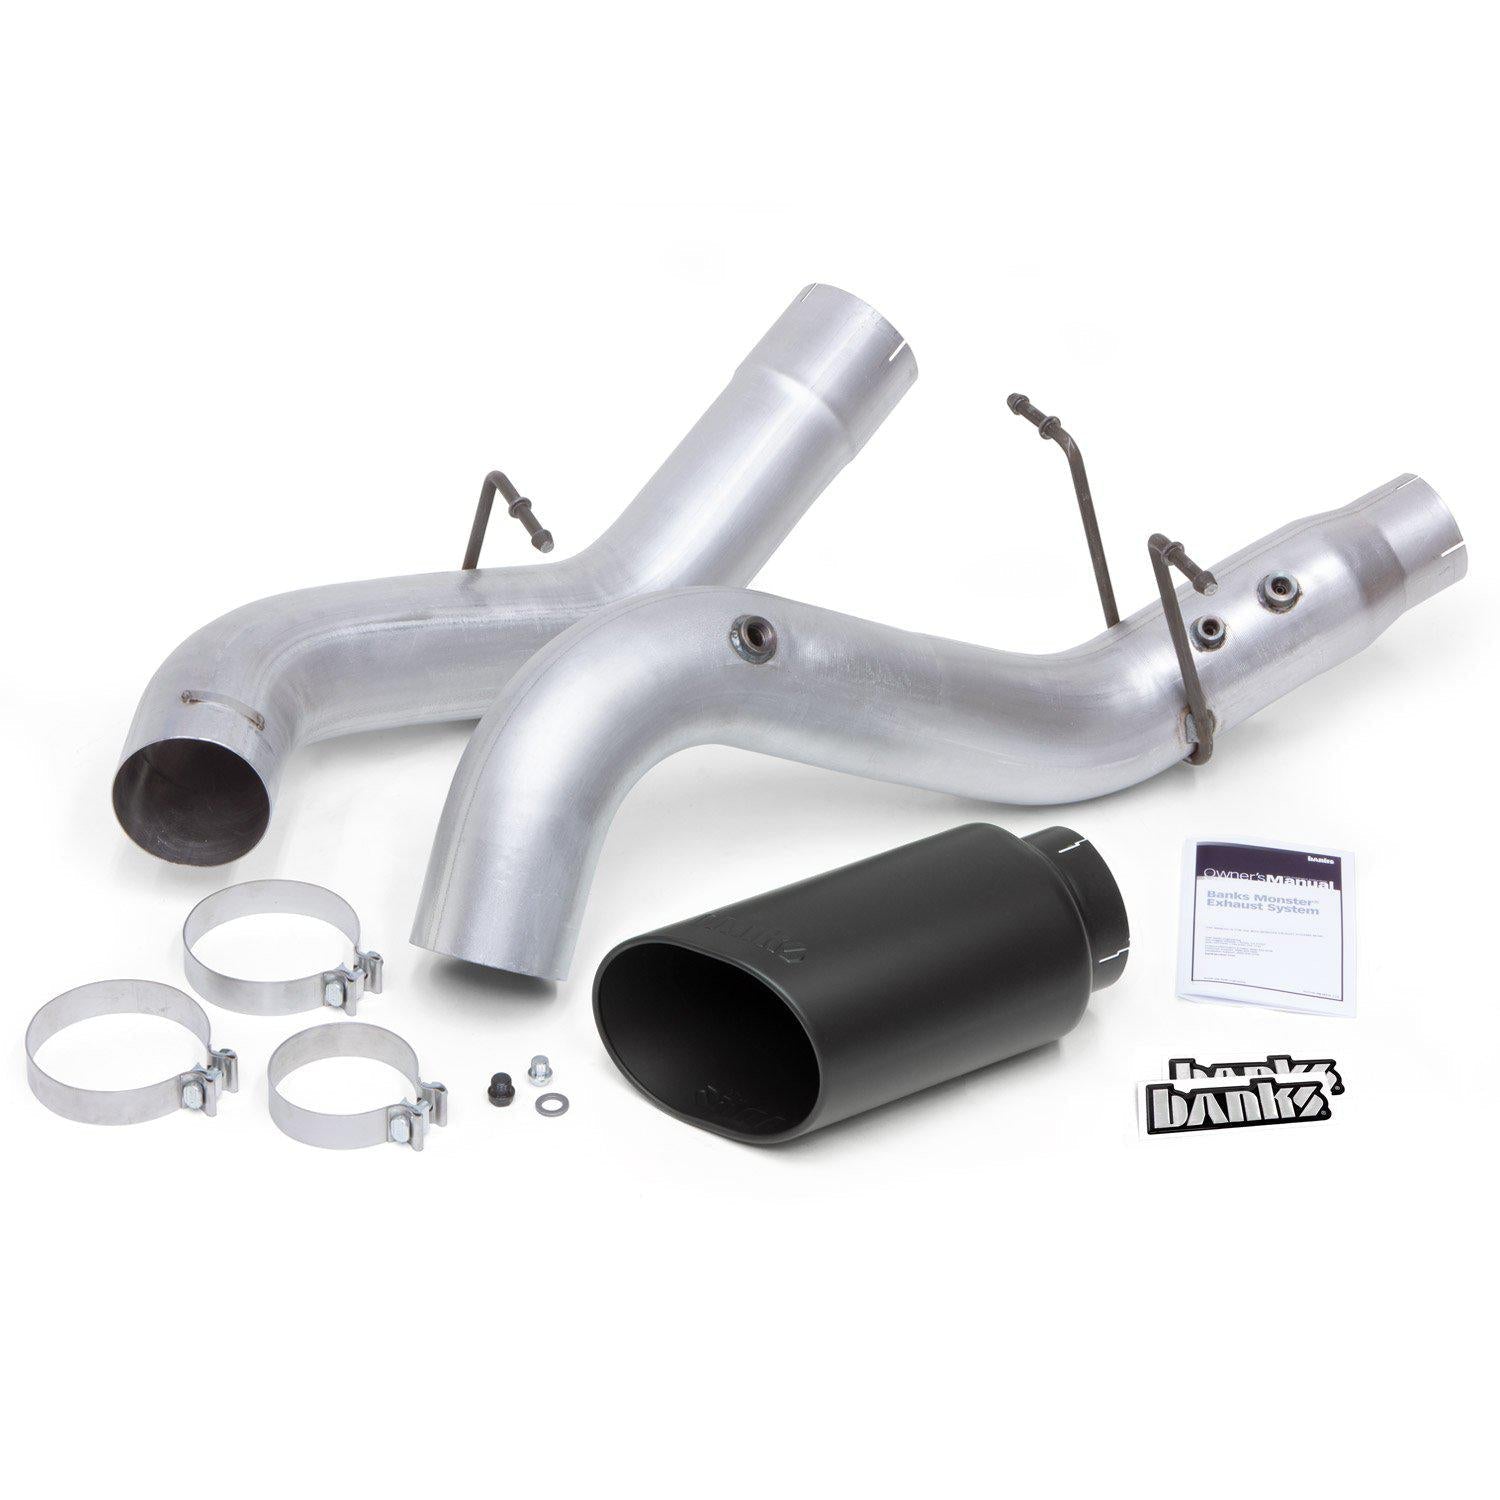 2017-2019 Duramax 5" Filter Back Exhaust System (48996)-Filter Back Exhaust System-Banks Power-Dirty Diesel Customs